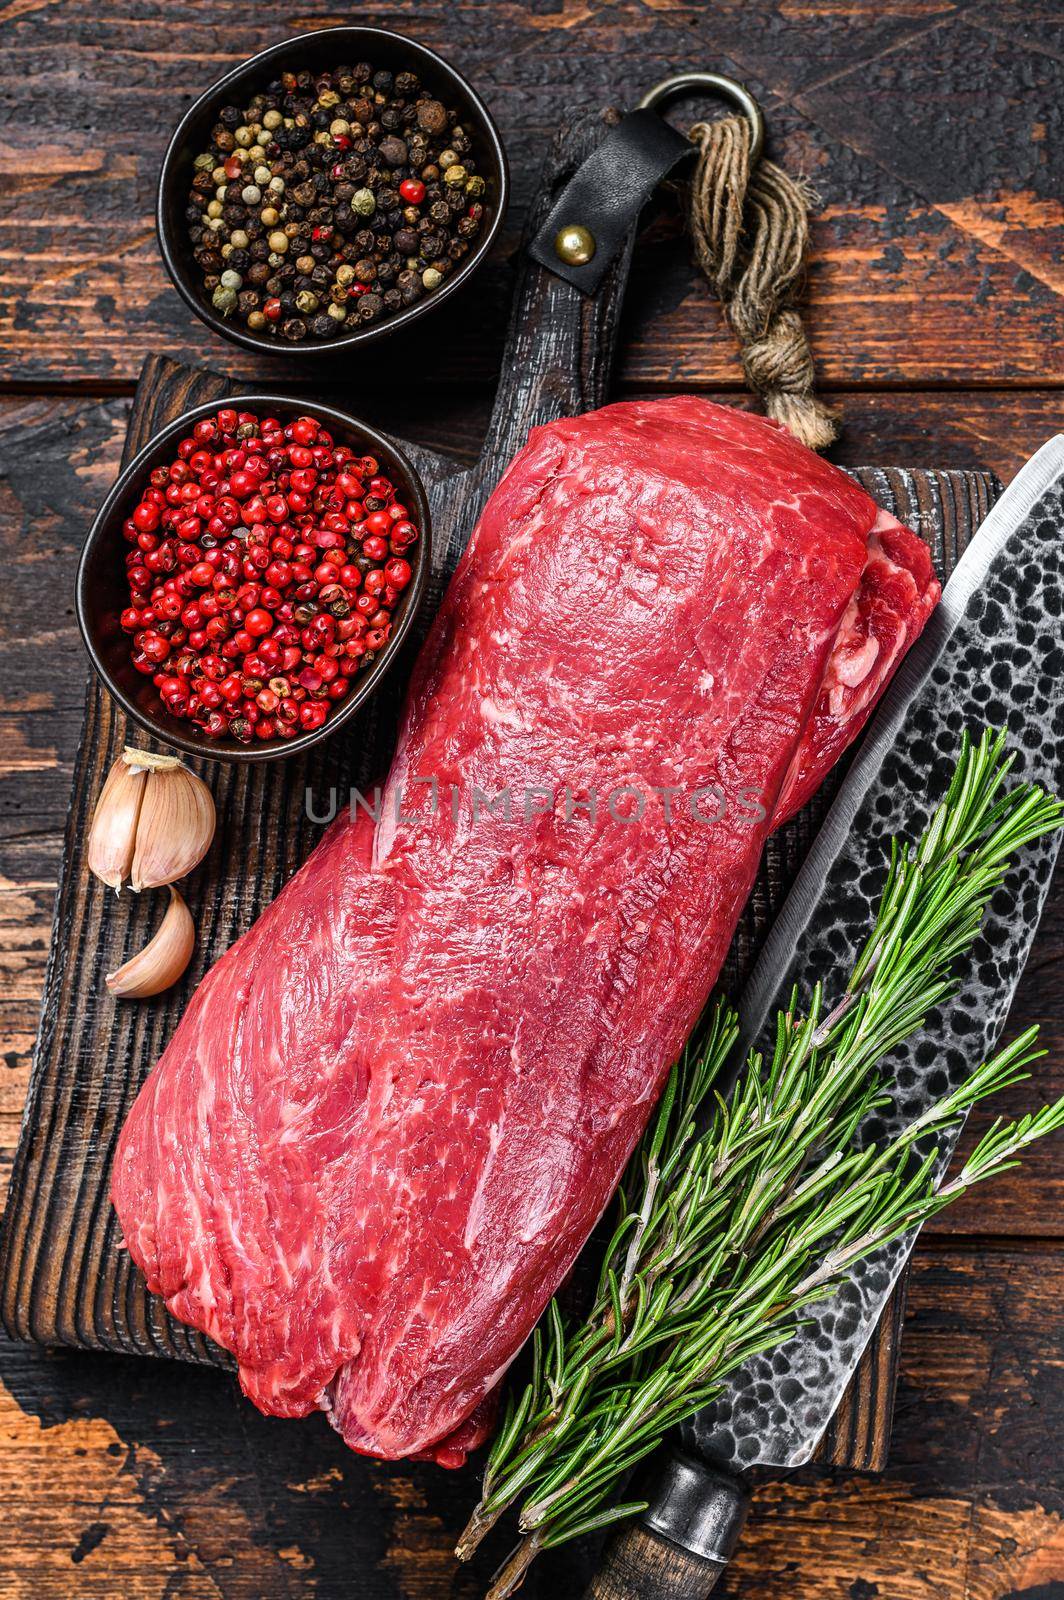 Whole Raw Tenderloin veal meat for steaks fillet mignon on a wooden cutting board with butcher knife. Dark wooden background. Top view by Composter